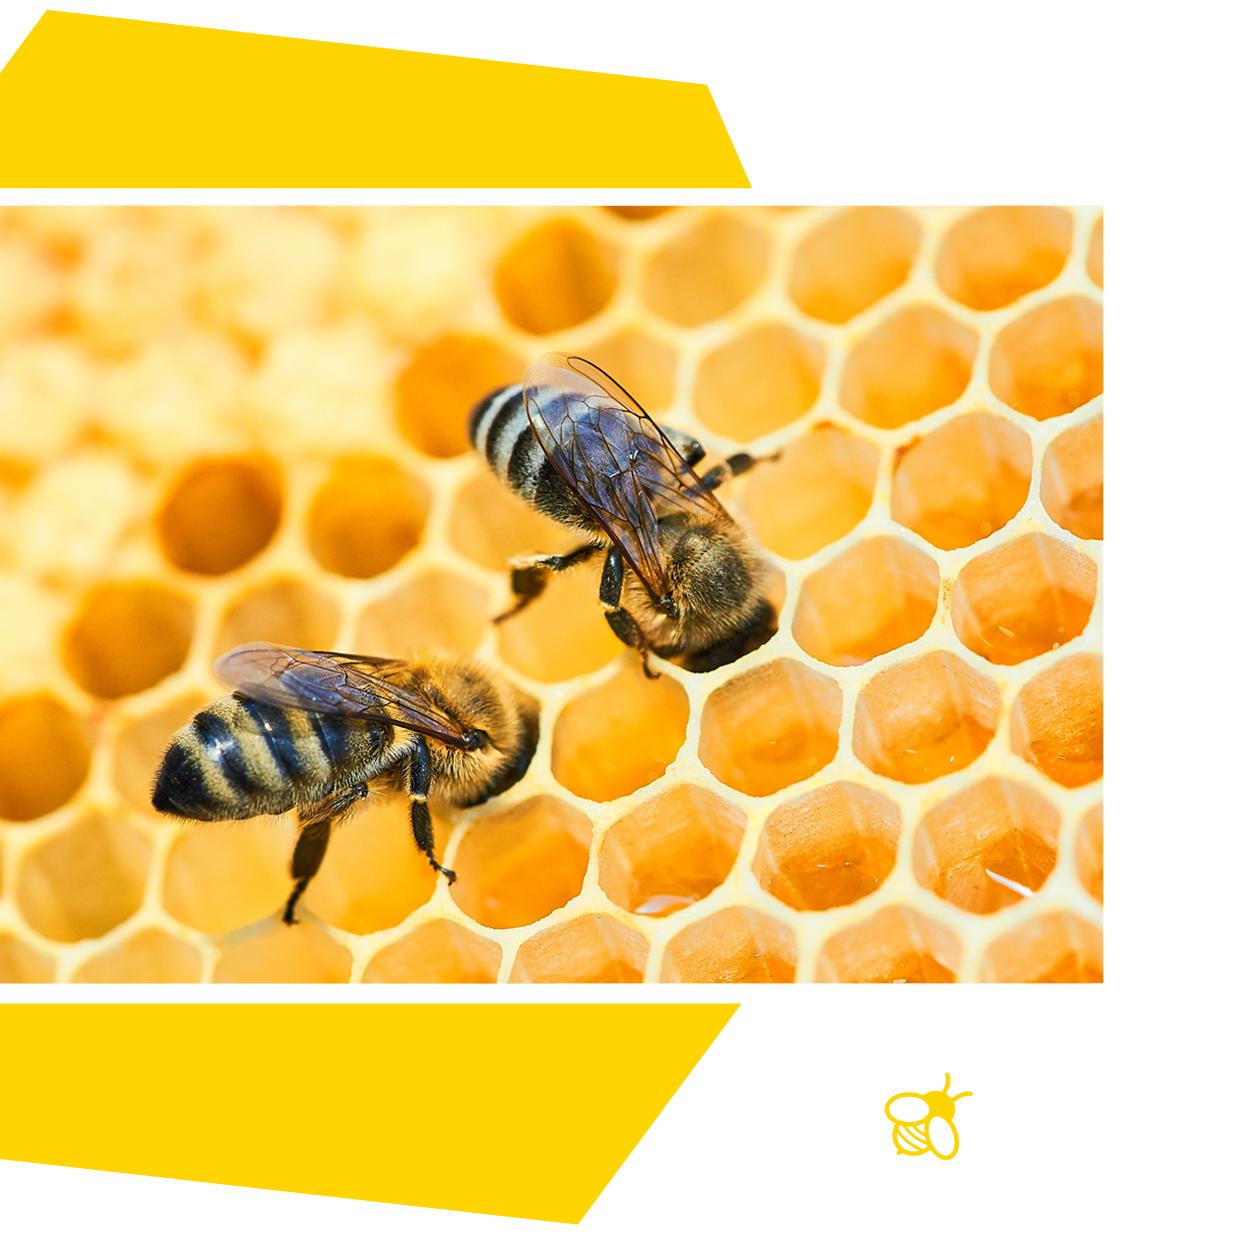 Two little bees put their heads in a honeycomb